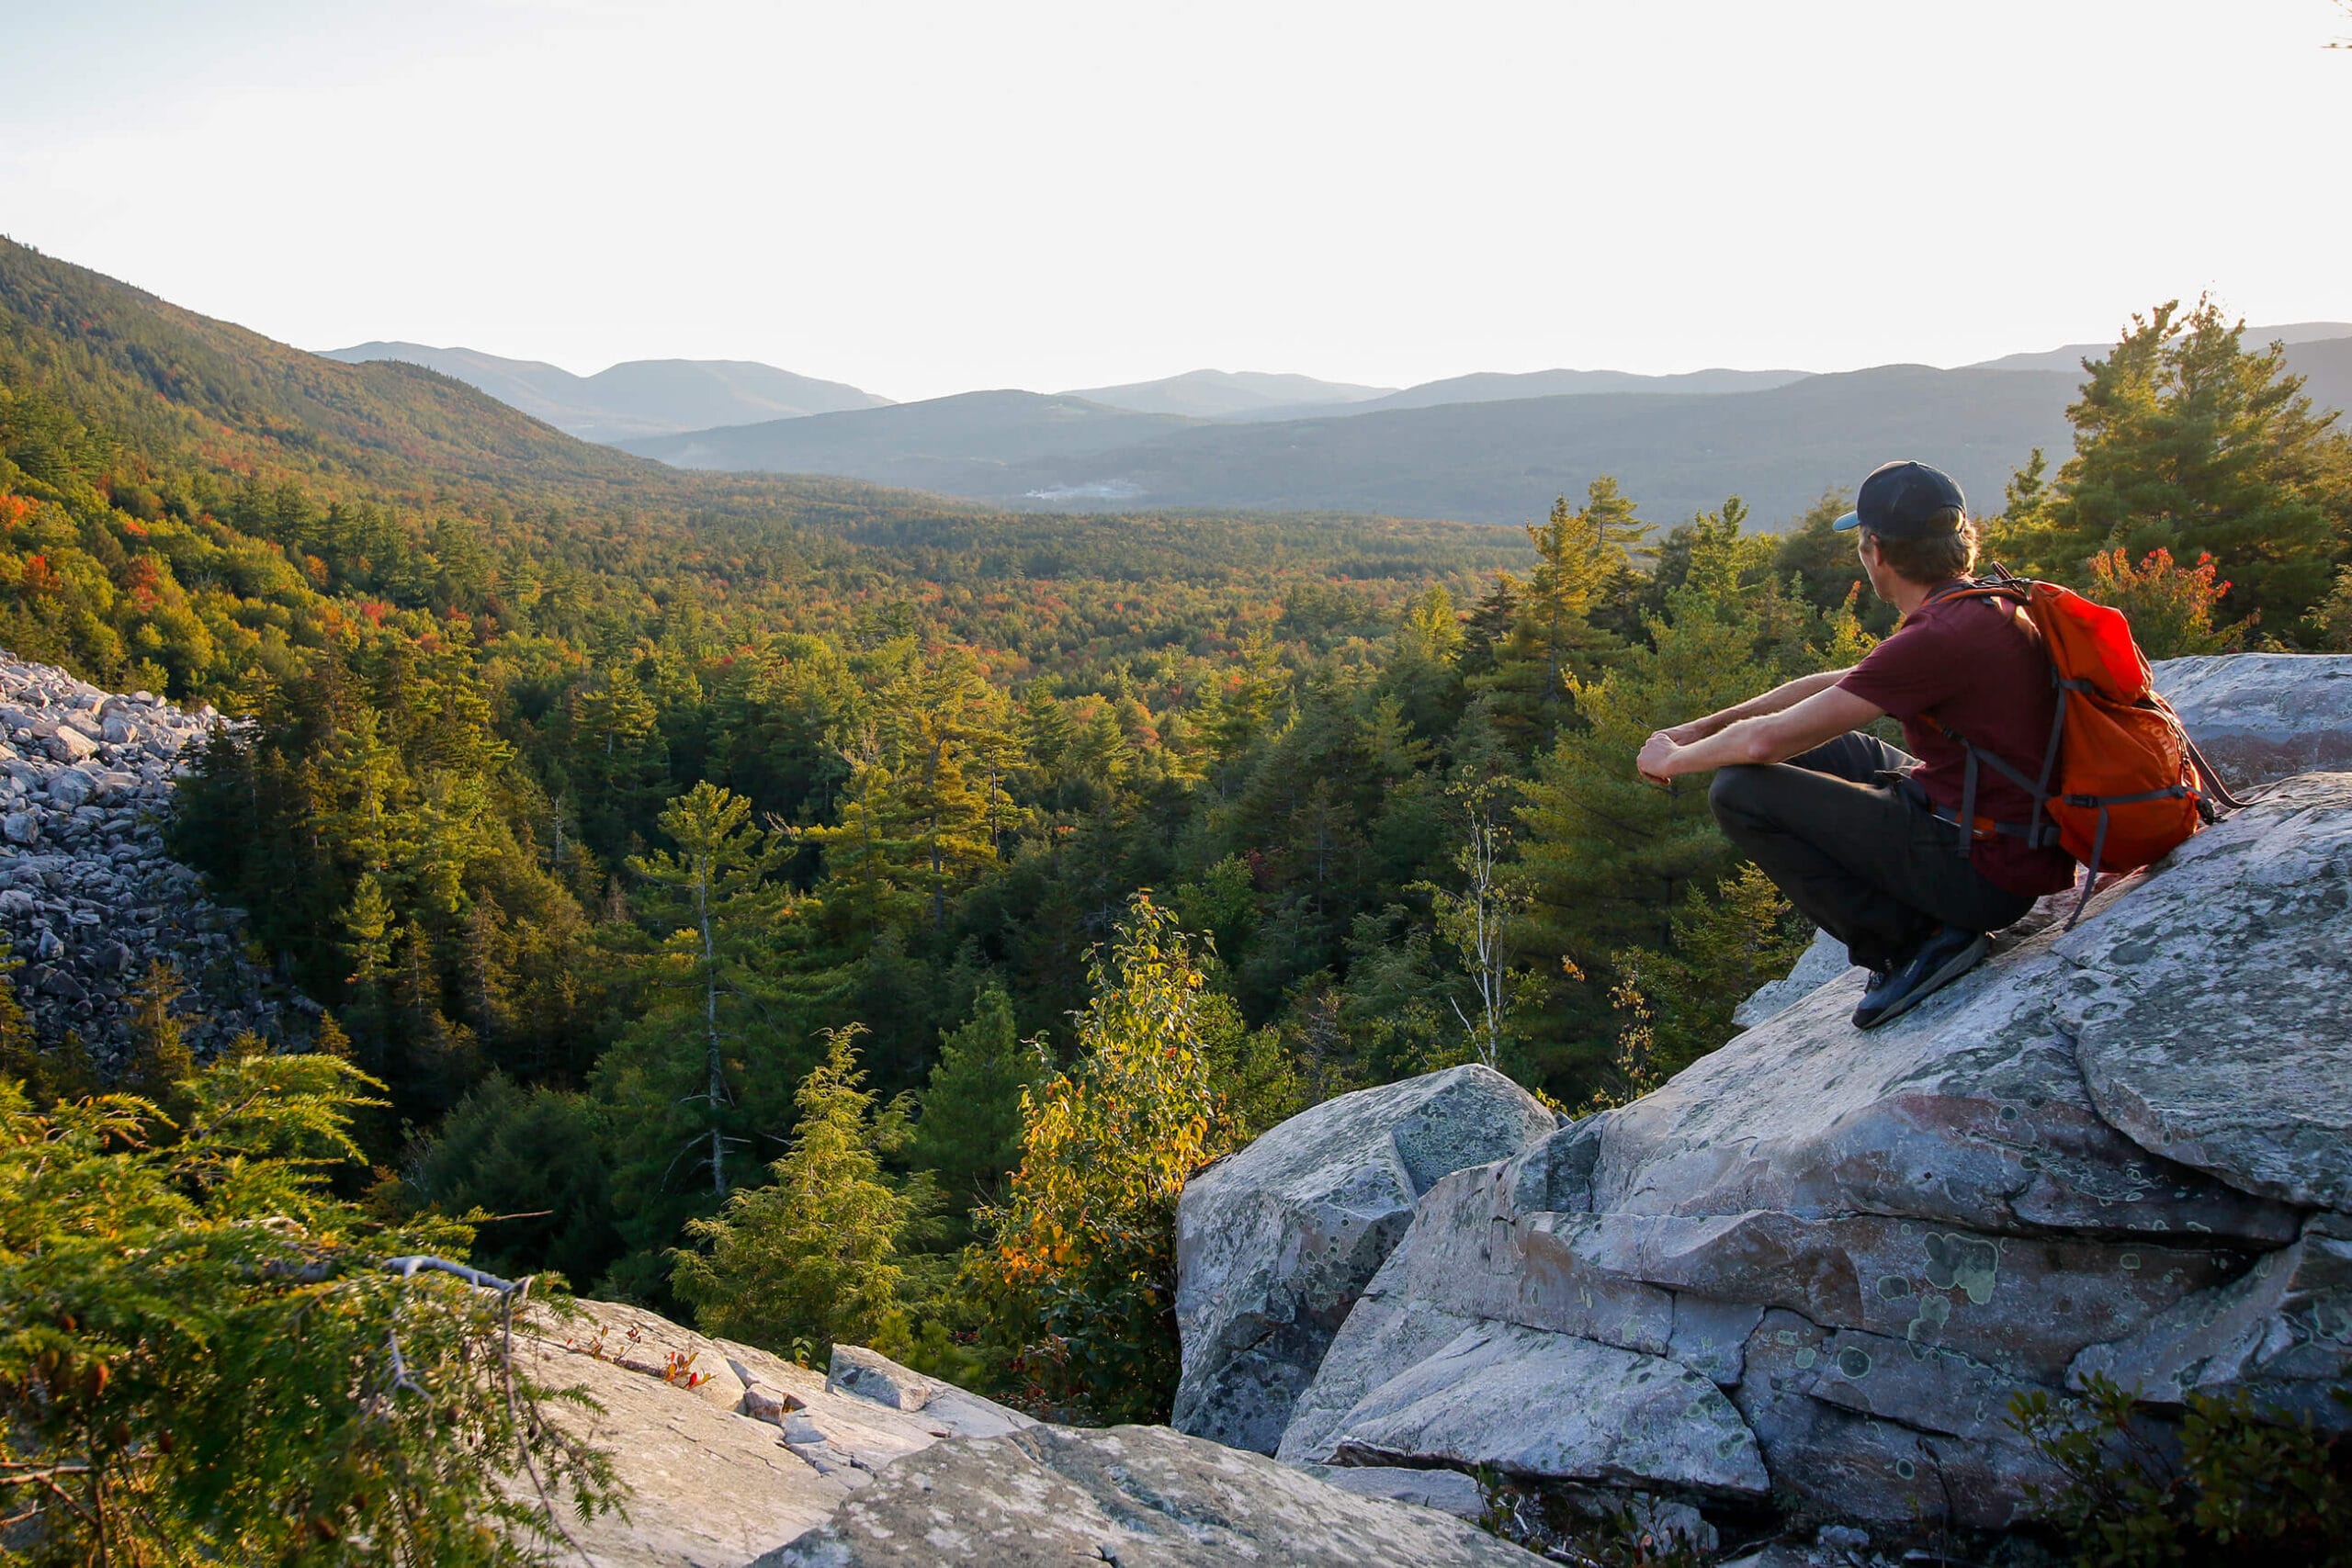 A person sitting on a rock overlooking a valley.